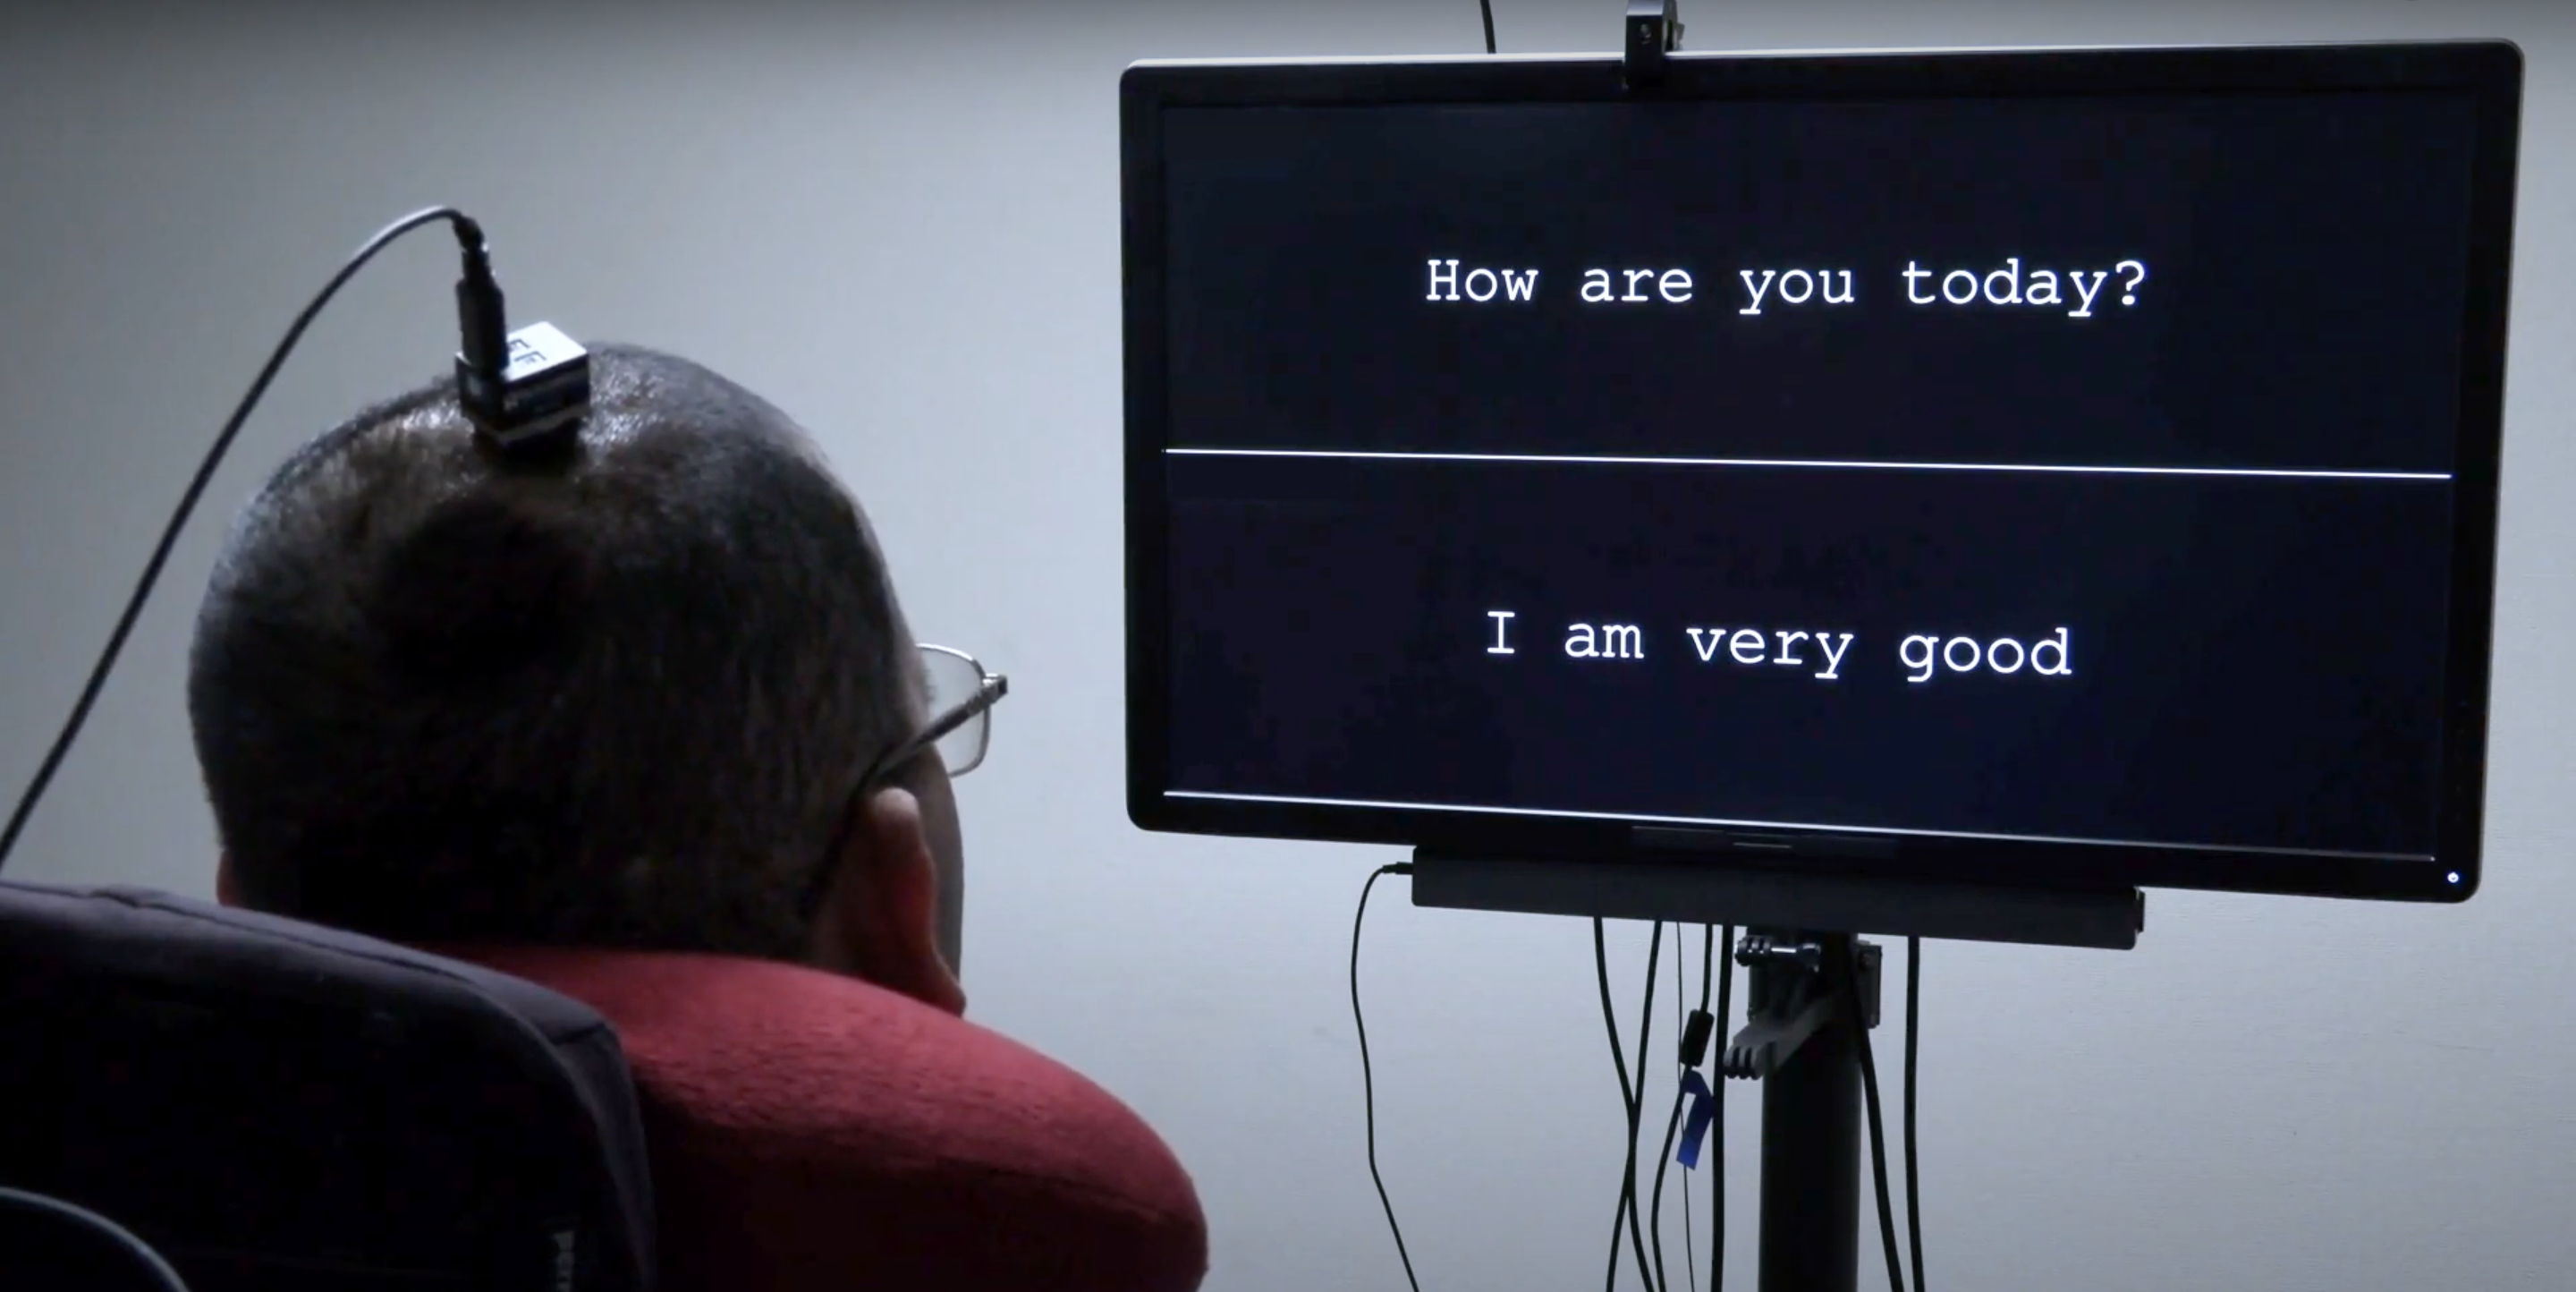 A man using an interface, looking at a screen with words on it.